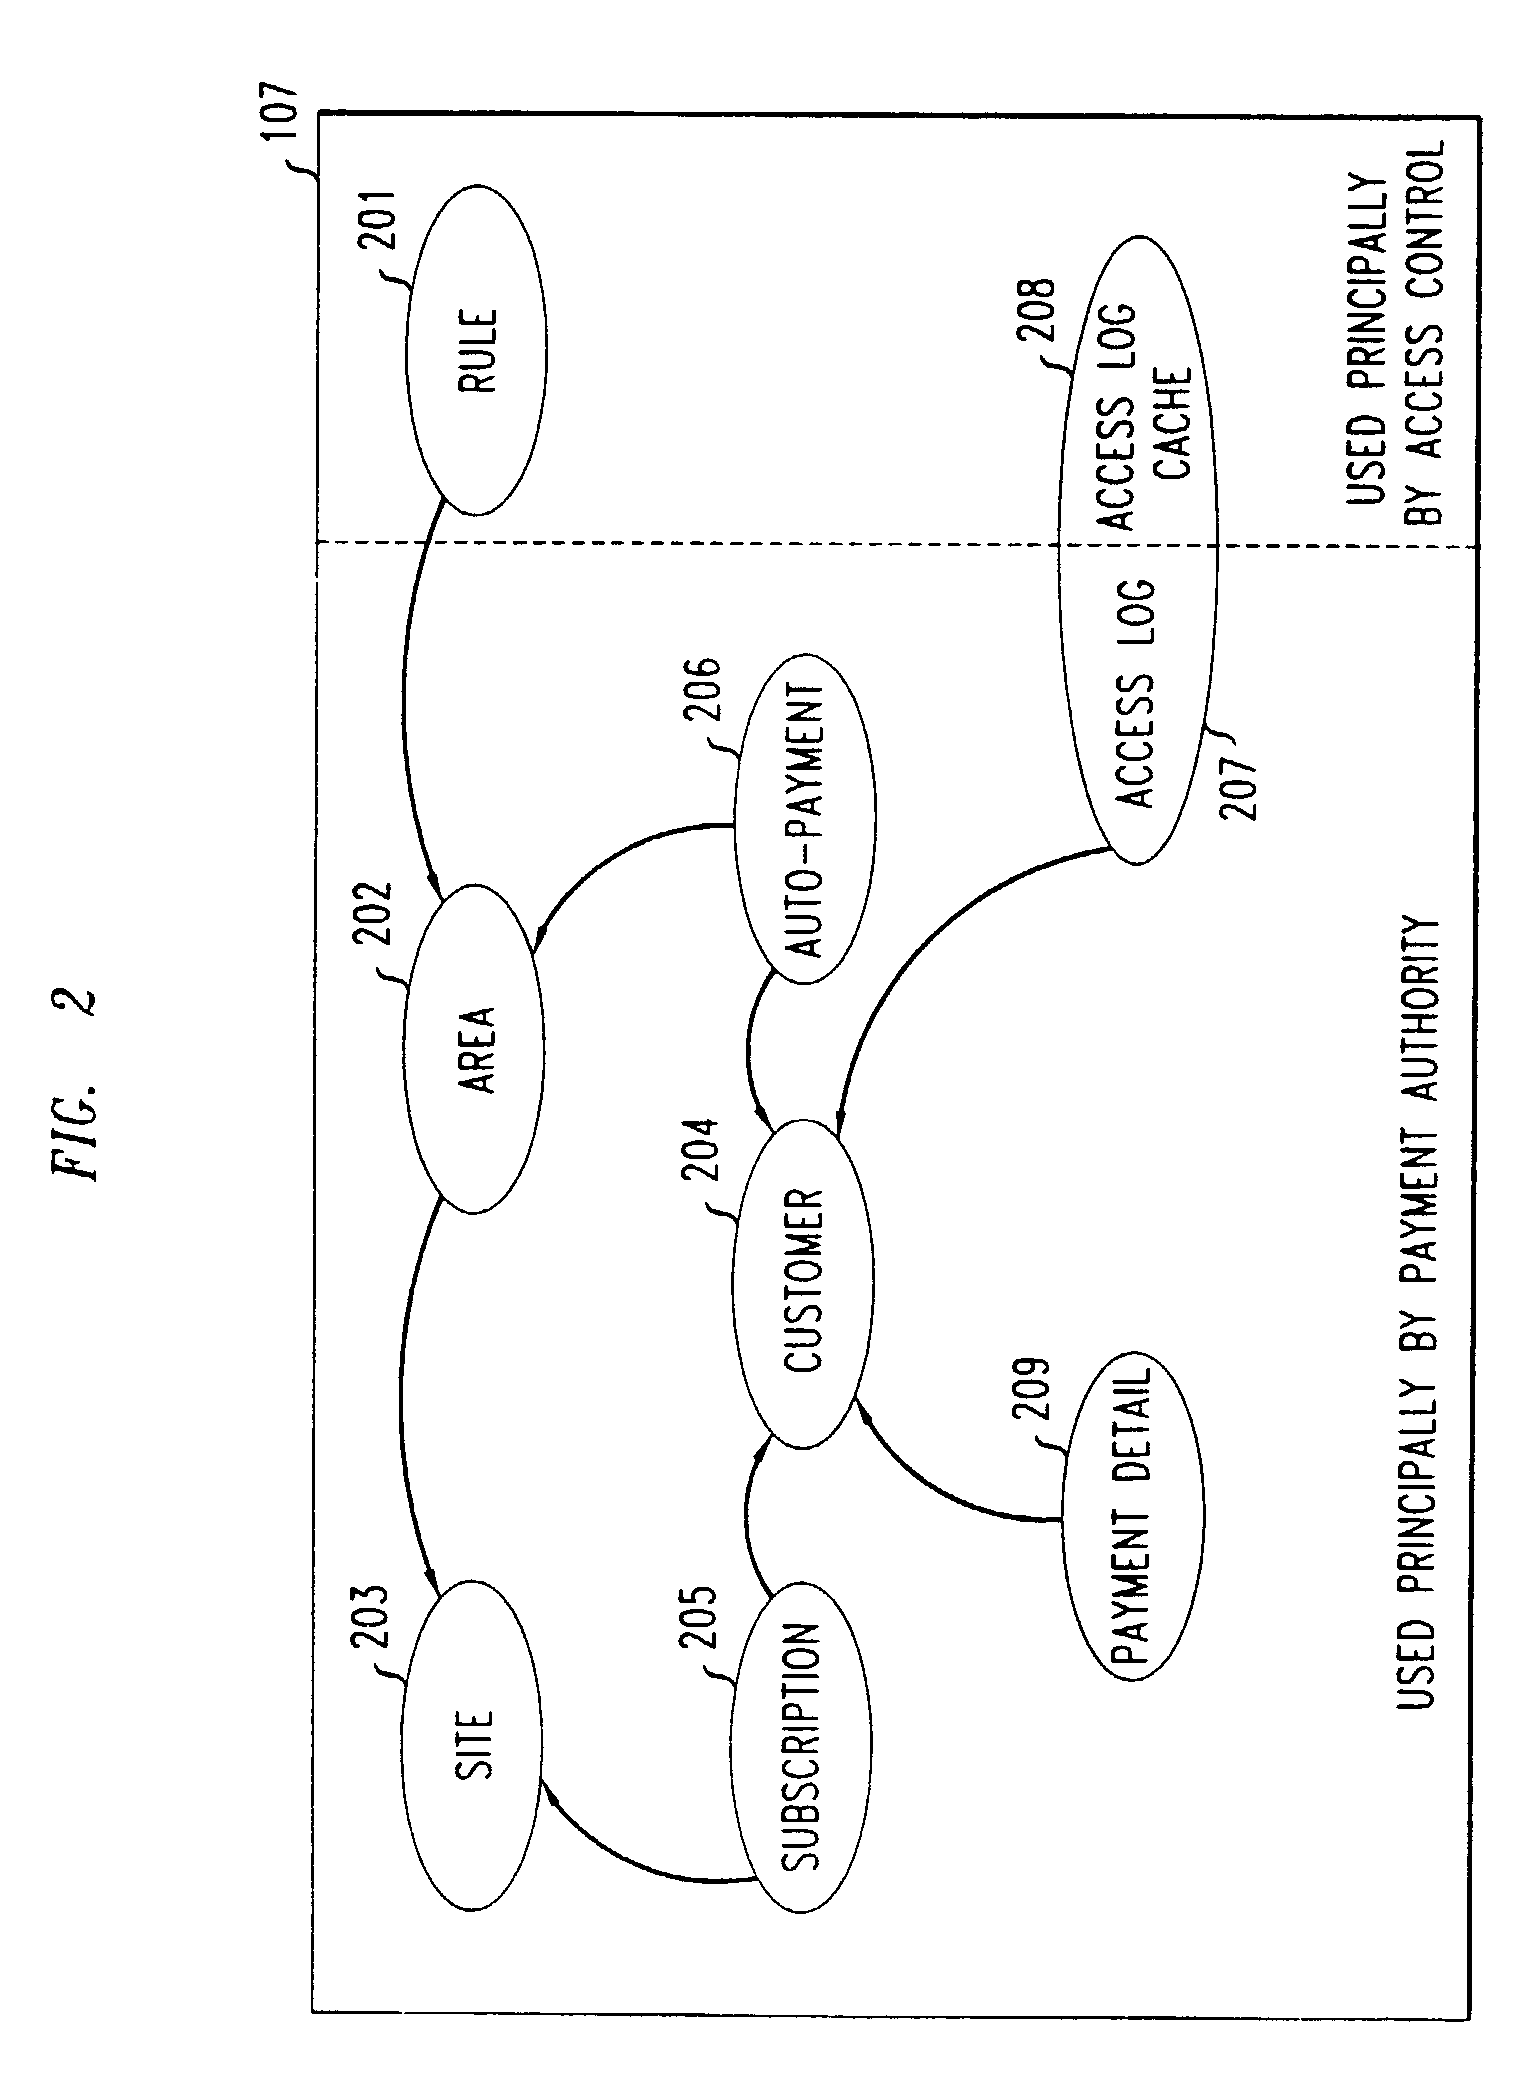 Method and apparatus for the payment of internet content